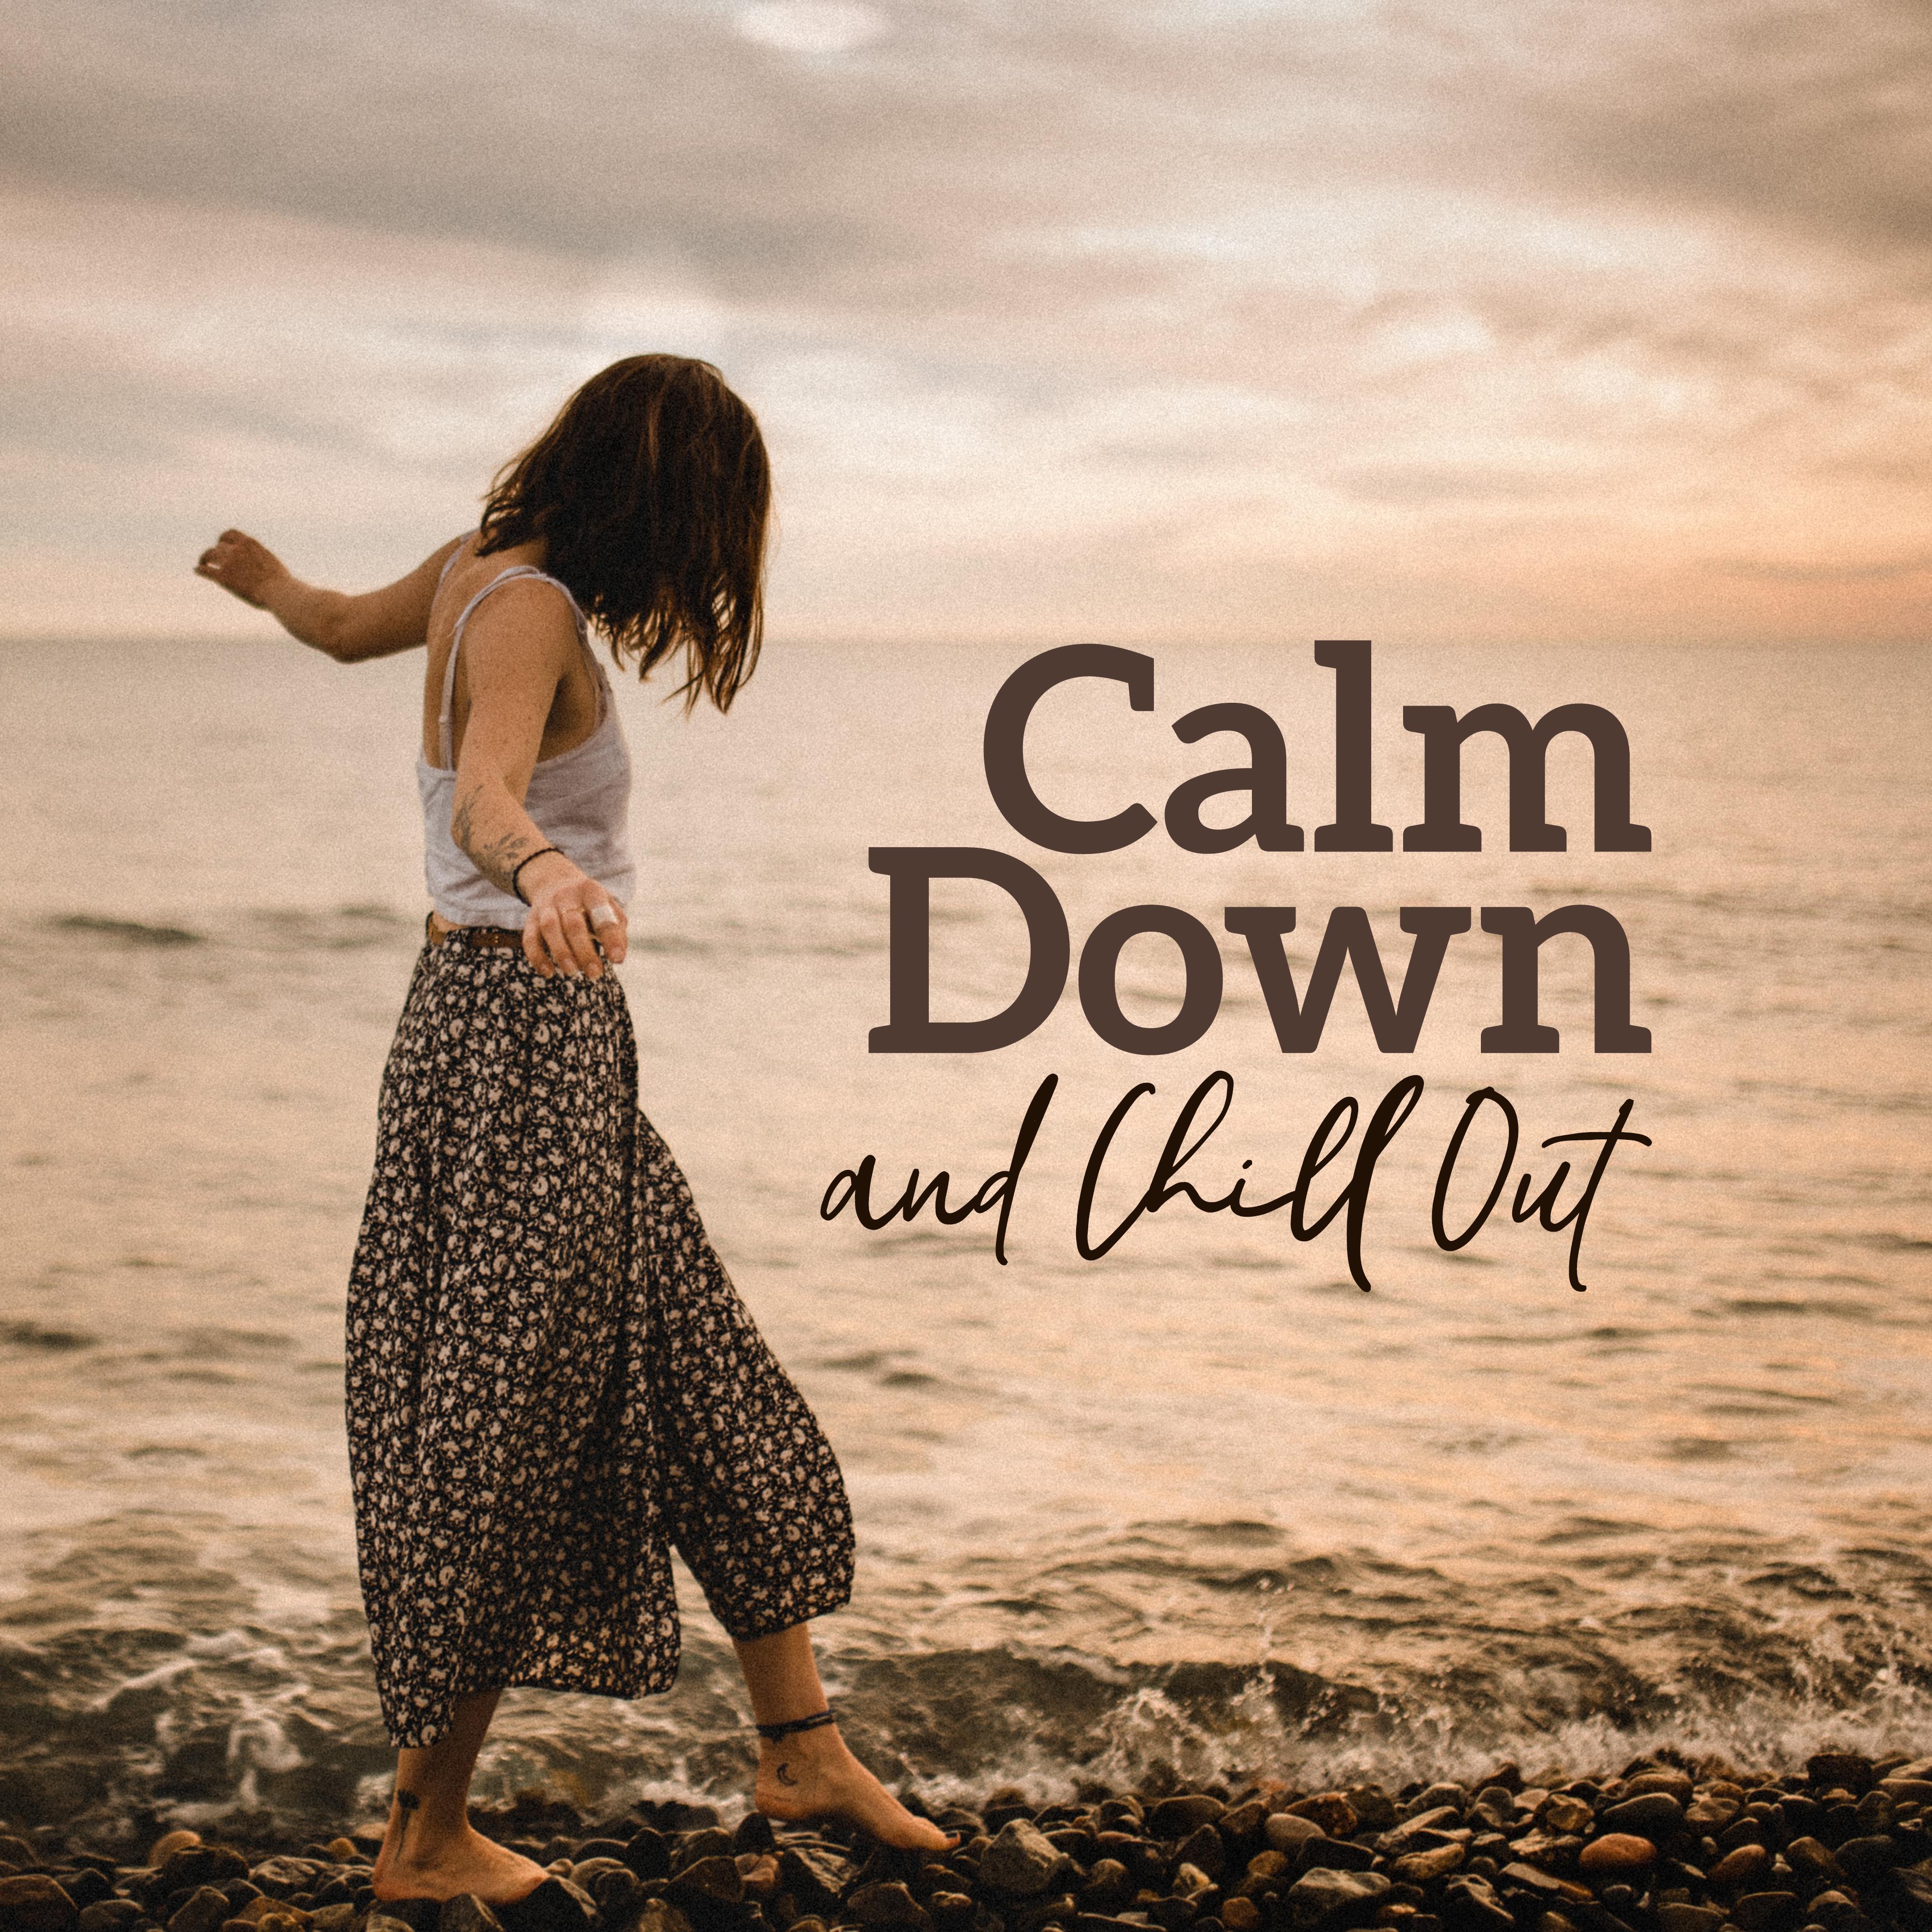 Calm Down and Chill Out: New Age Sounds that' ll Help You Calm Down, Destress and Relax from Everyday Matters and Duties